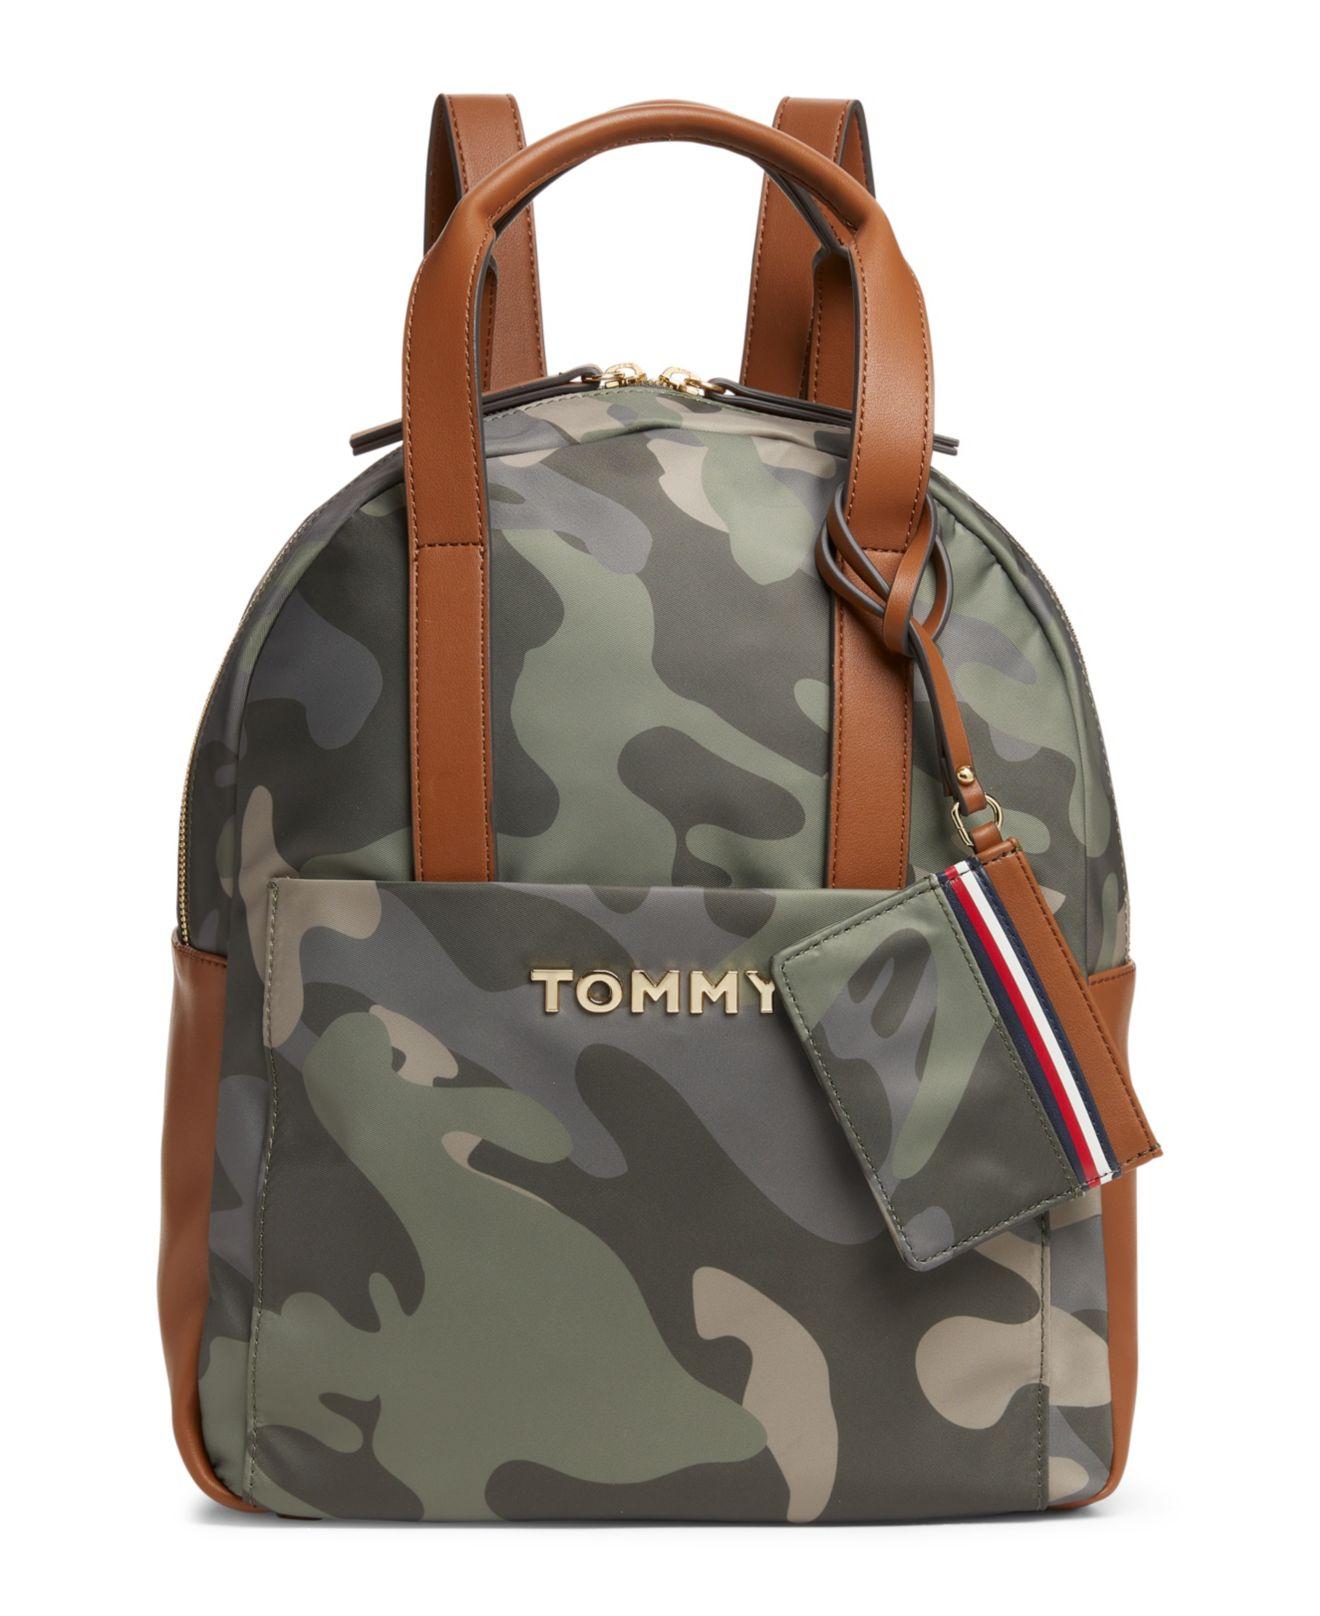 Tommy Hilfiger Synthetic Daniella Camo Backpack in Green Camo (Green) - Lyst